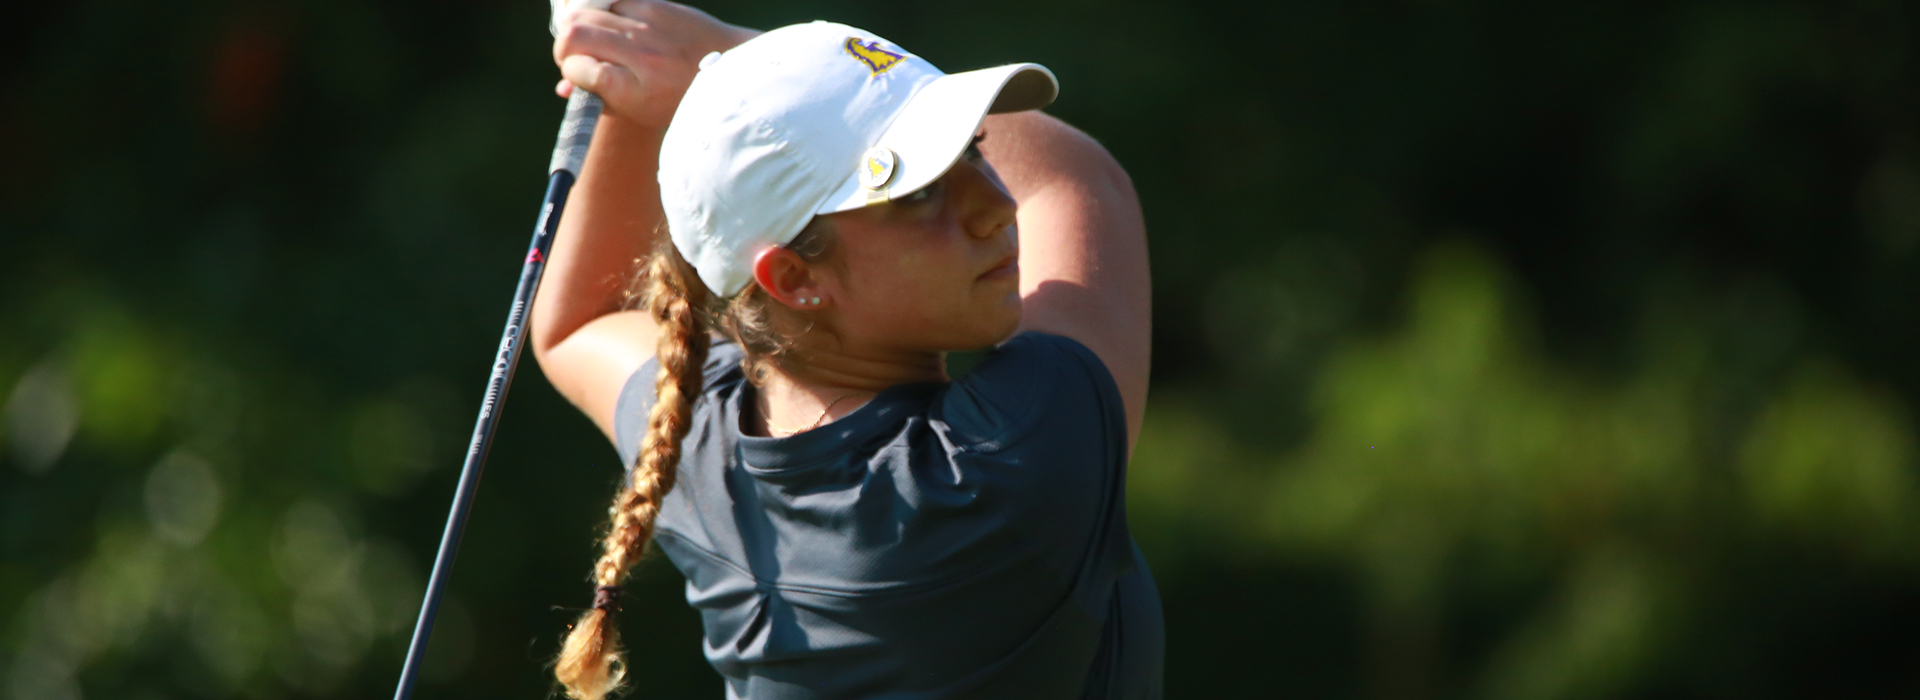 Tech seventh after first 36 holes at Brickyard Collegiate